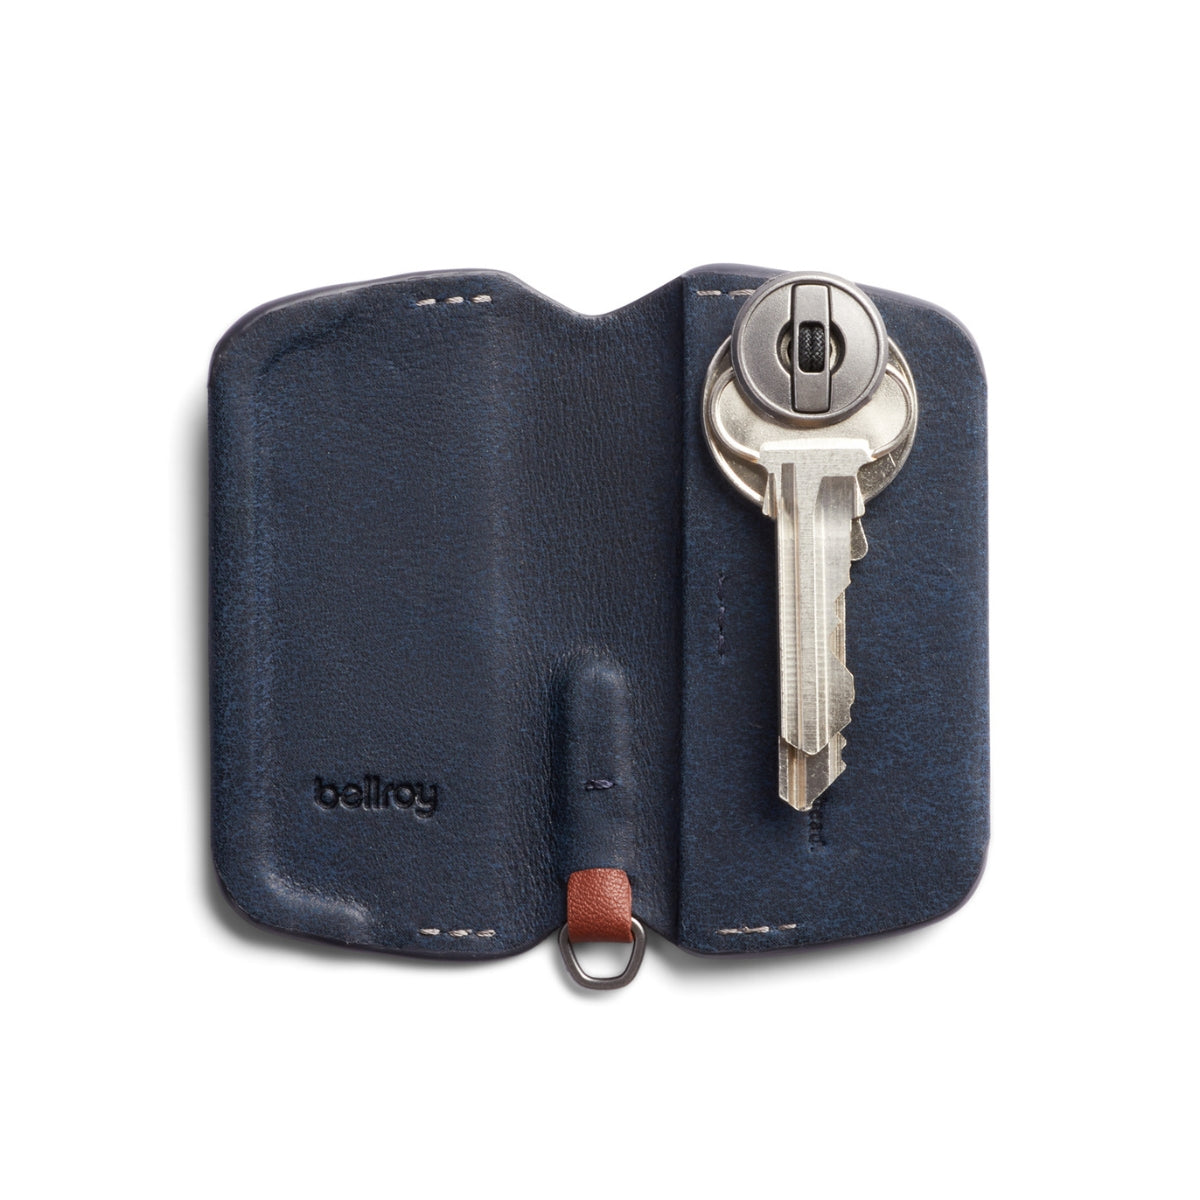 Bellroy Key Cover (Third Edition) in Ocean